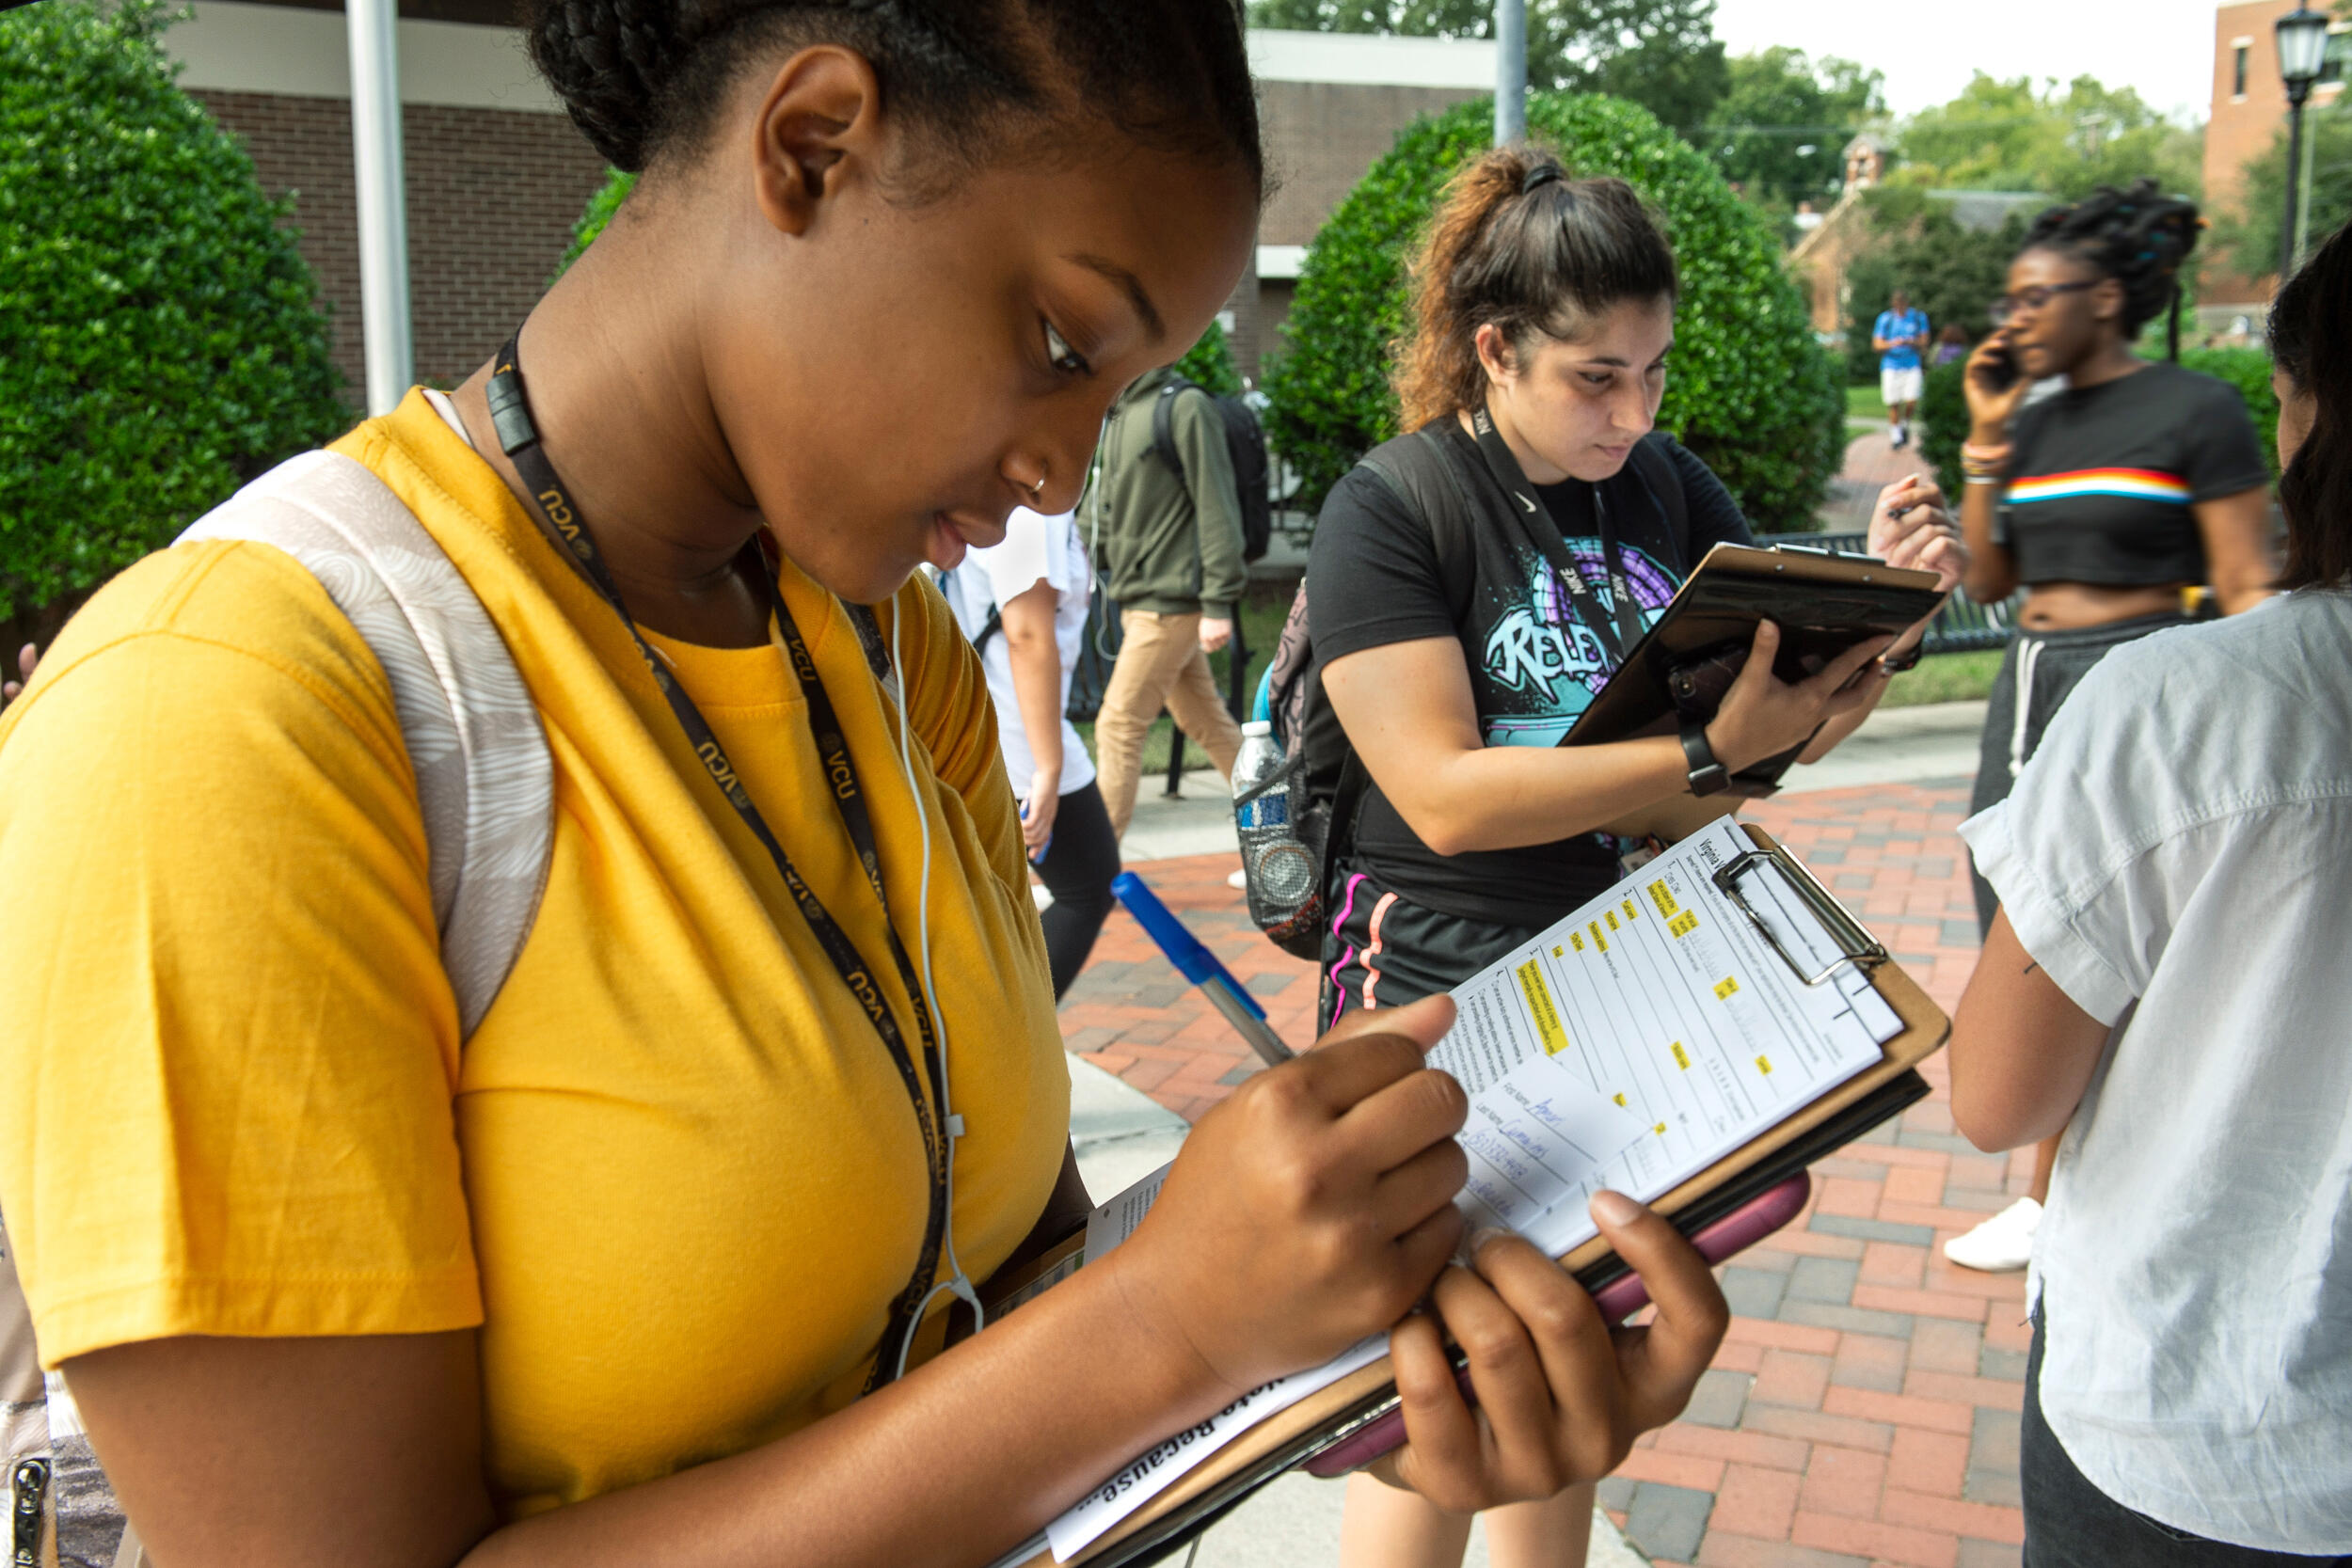 A student registers to vote on a clipboard while standing on a sidewalk with hedges in the background.